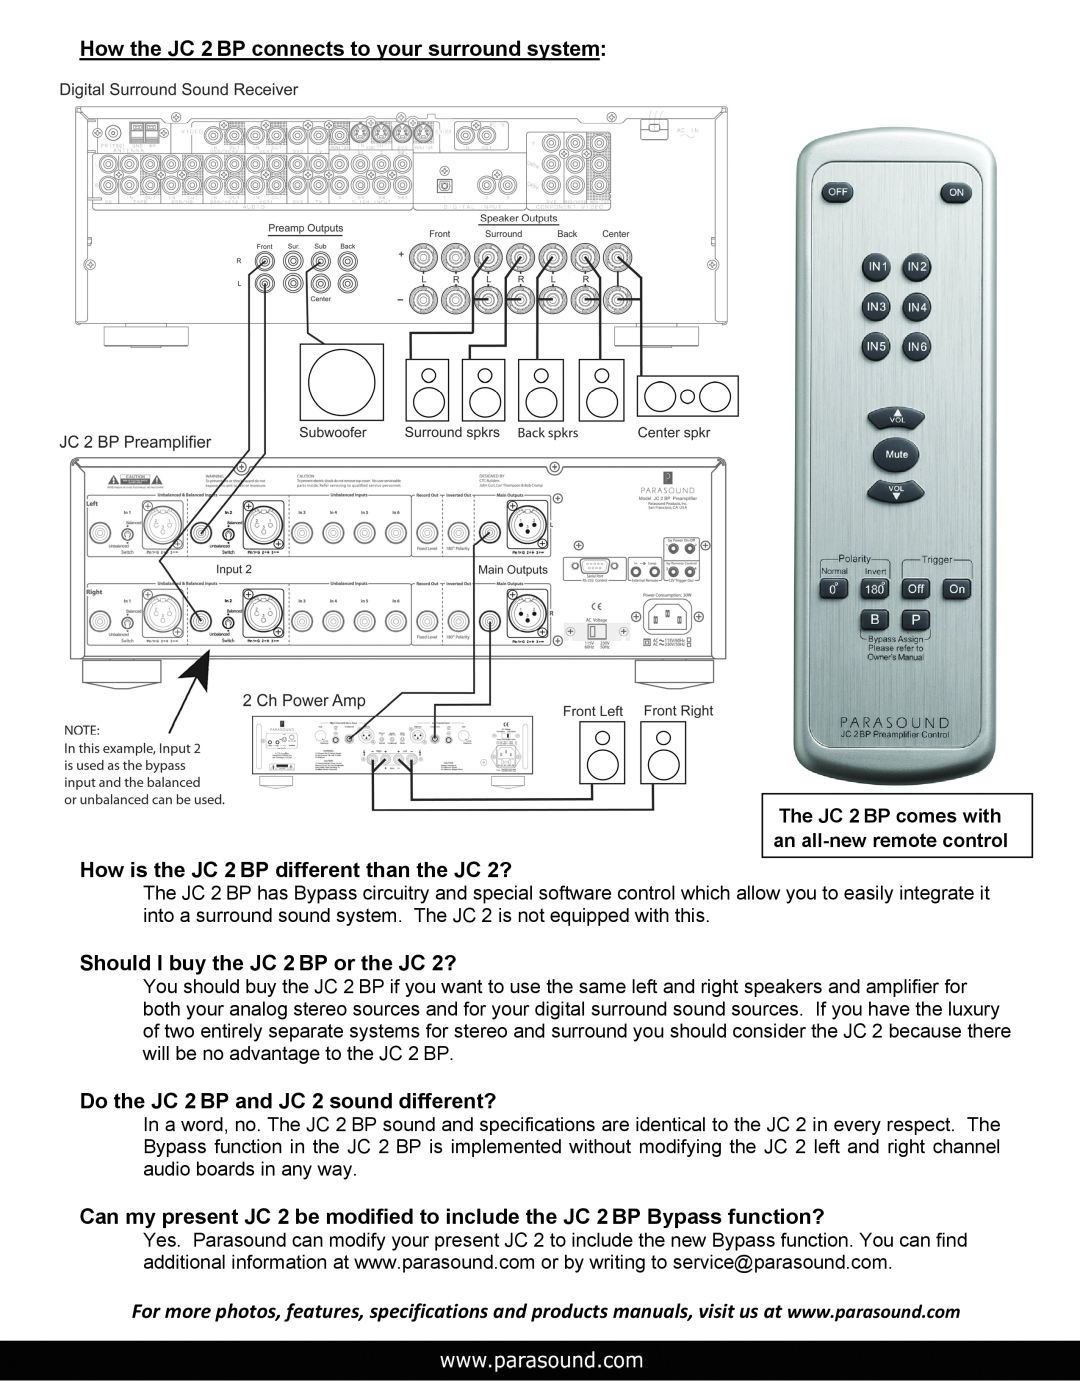 Parasound manual How the JC 2 BP connects to your surround system, How is the JC 2 BP different than the JC 2? 